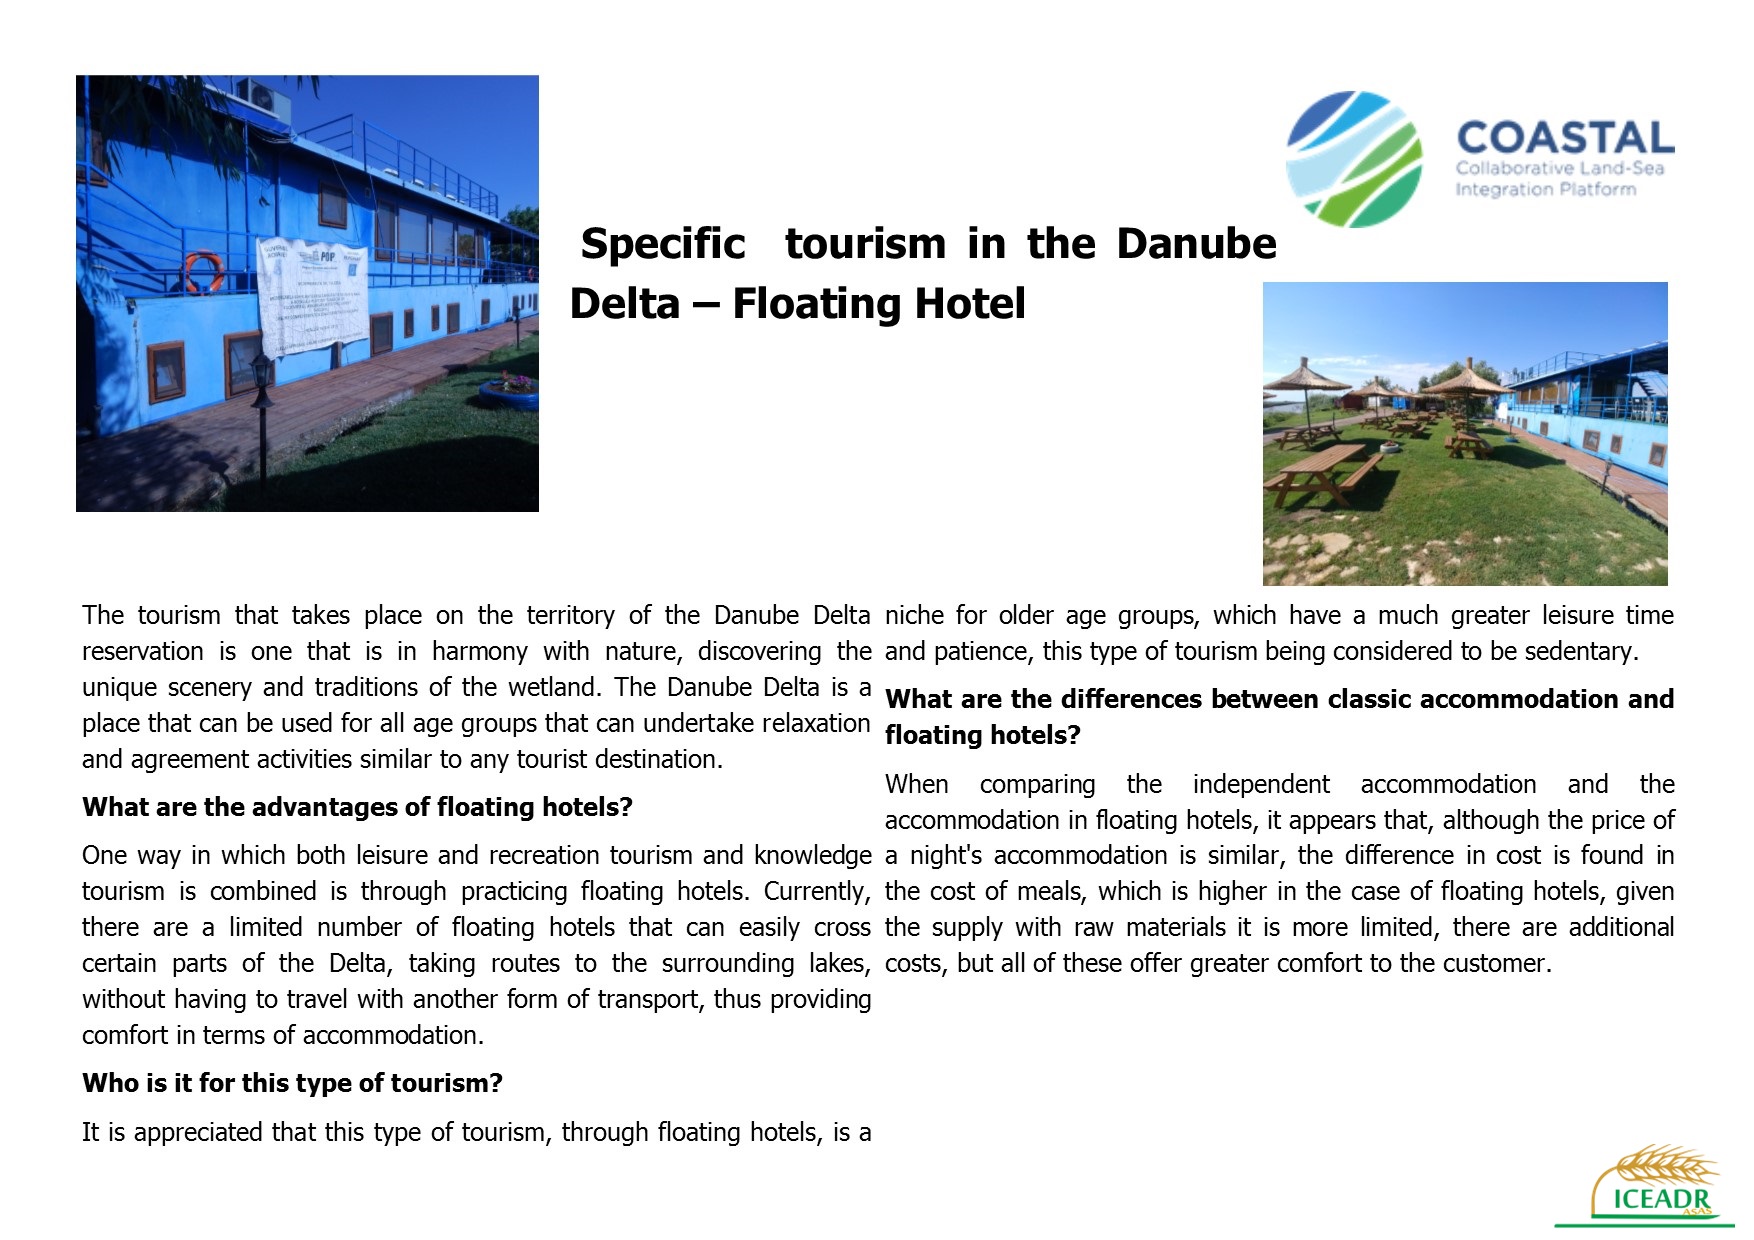 Specific tourism in the Danube Delta –Floating Hotel